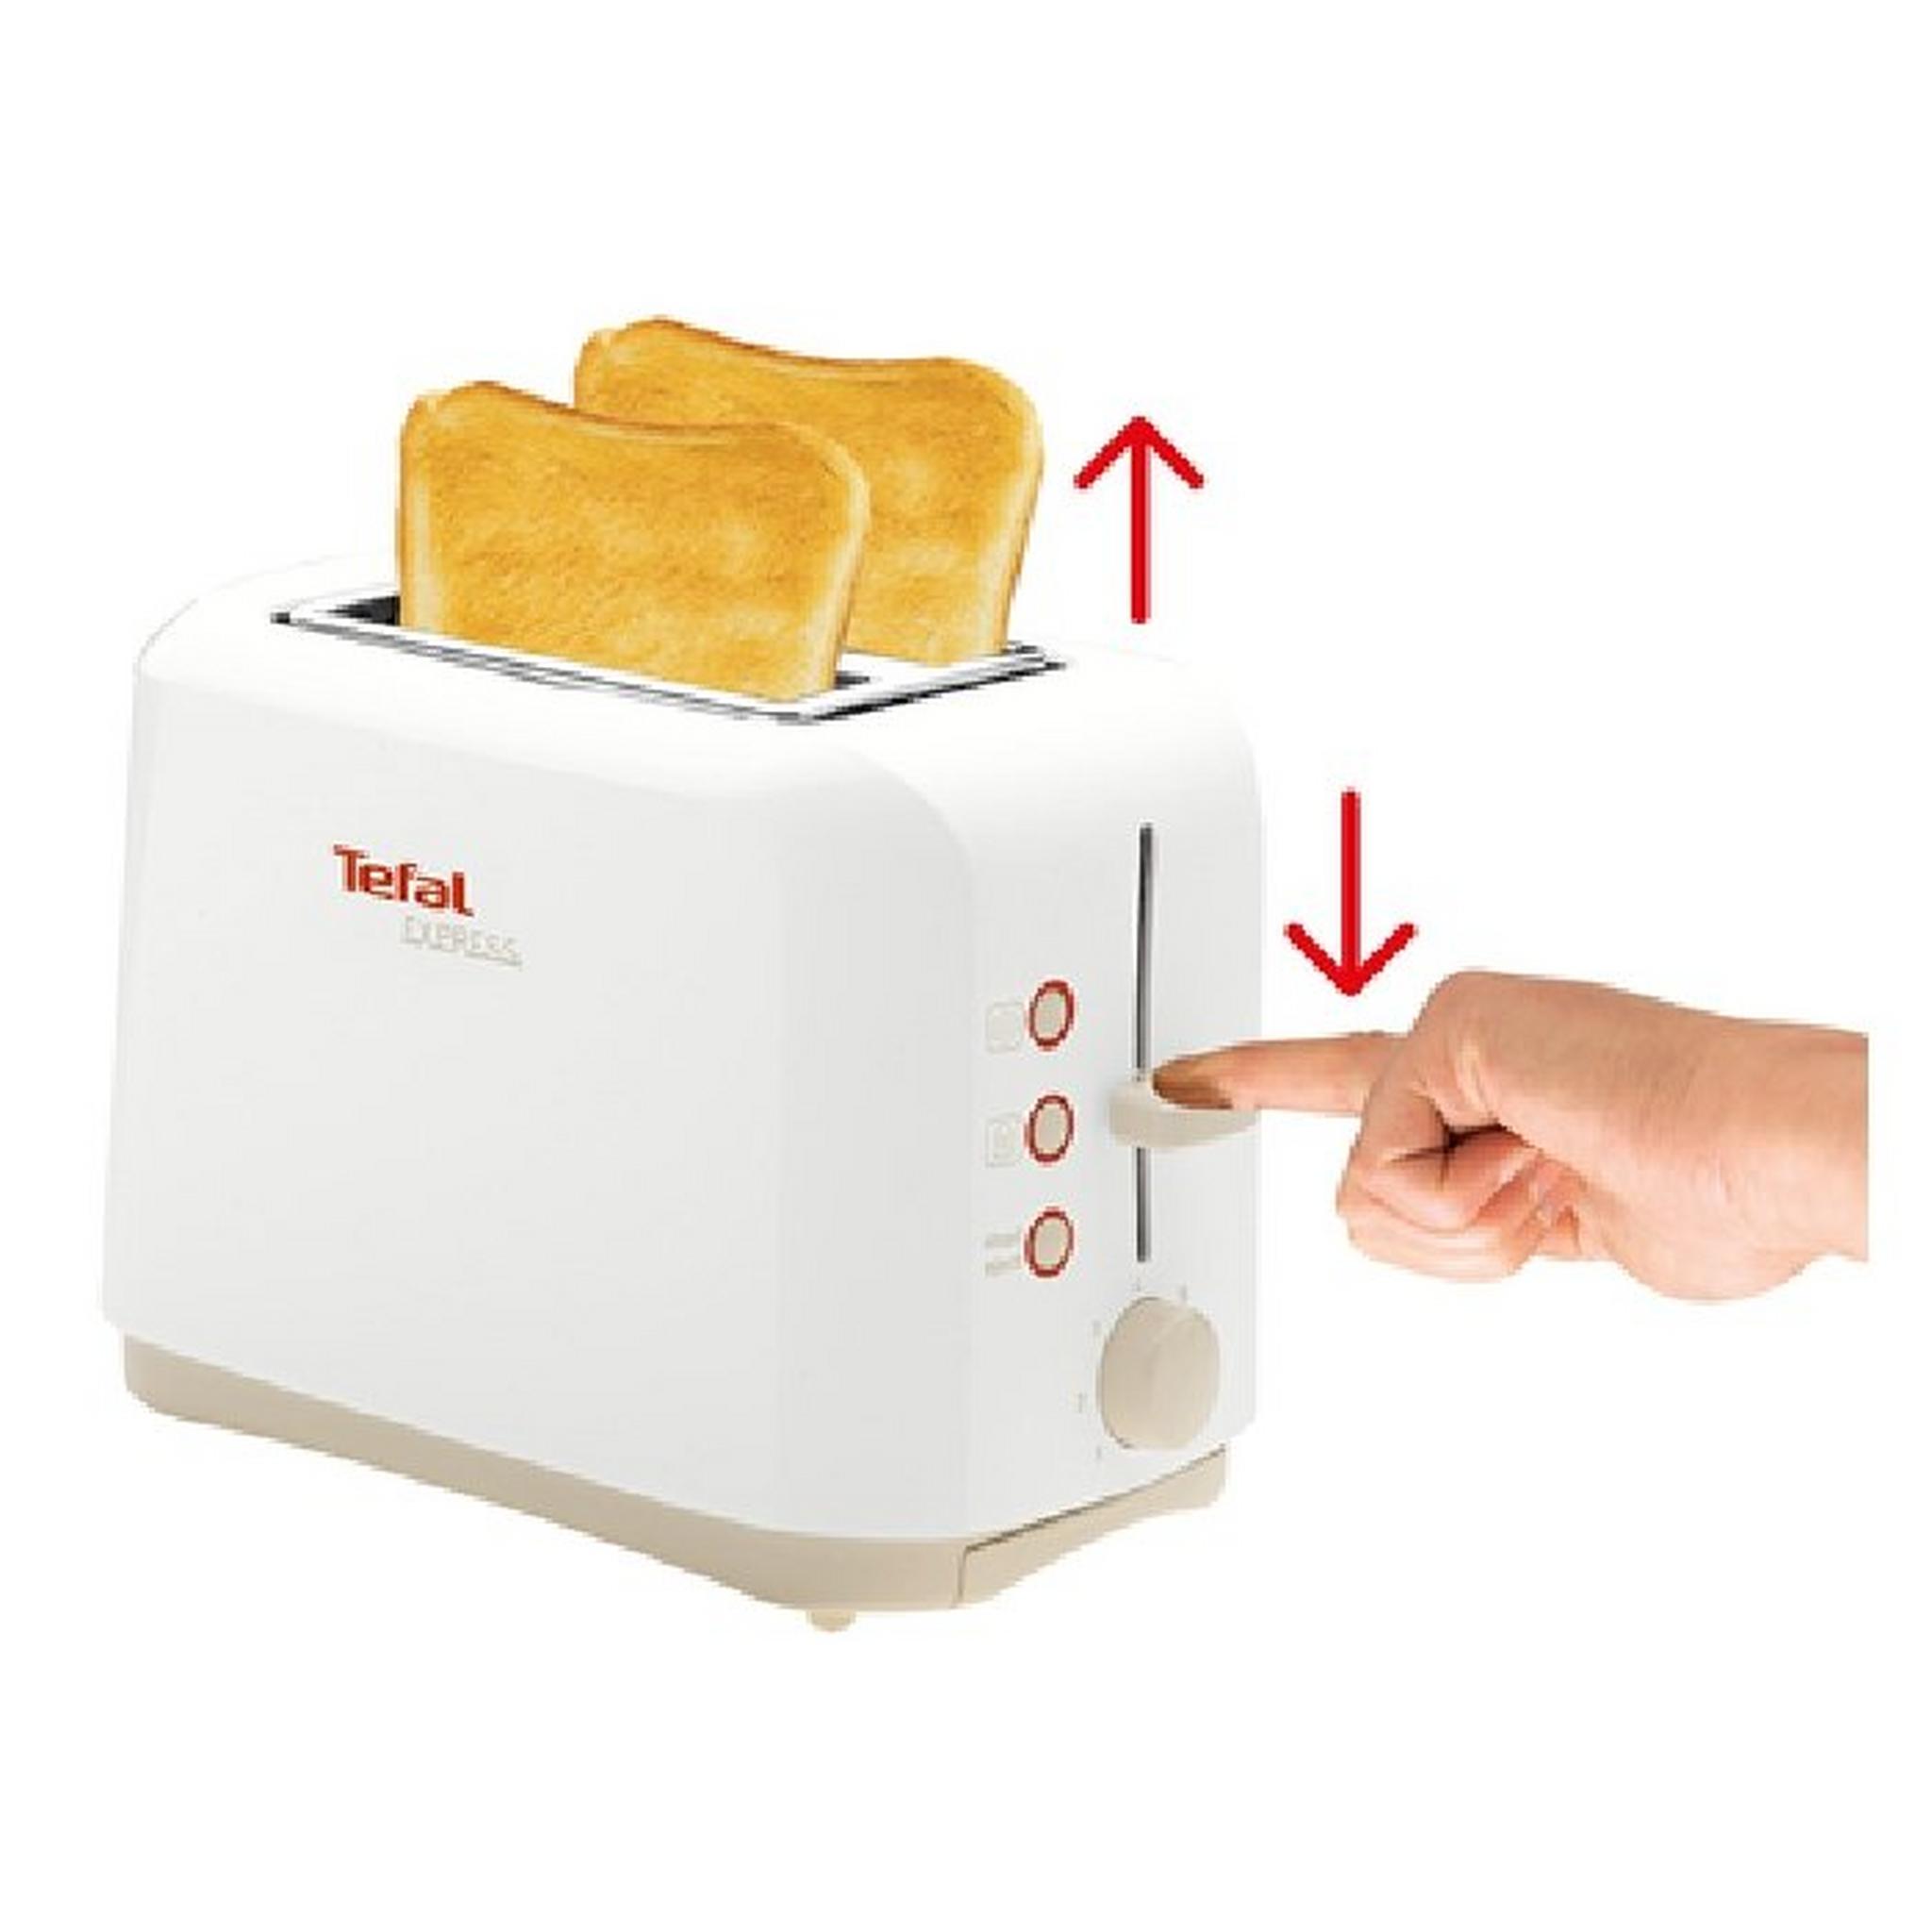 Tefal 850W Express 2 Slots Electric Toaster (TT357170) - White